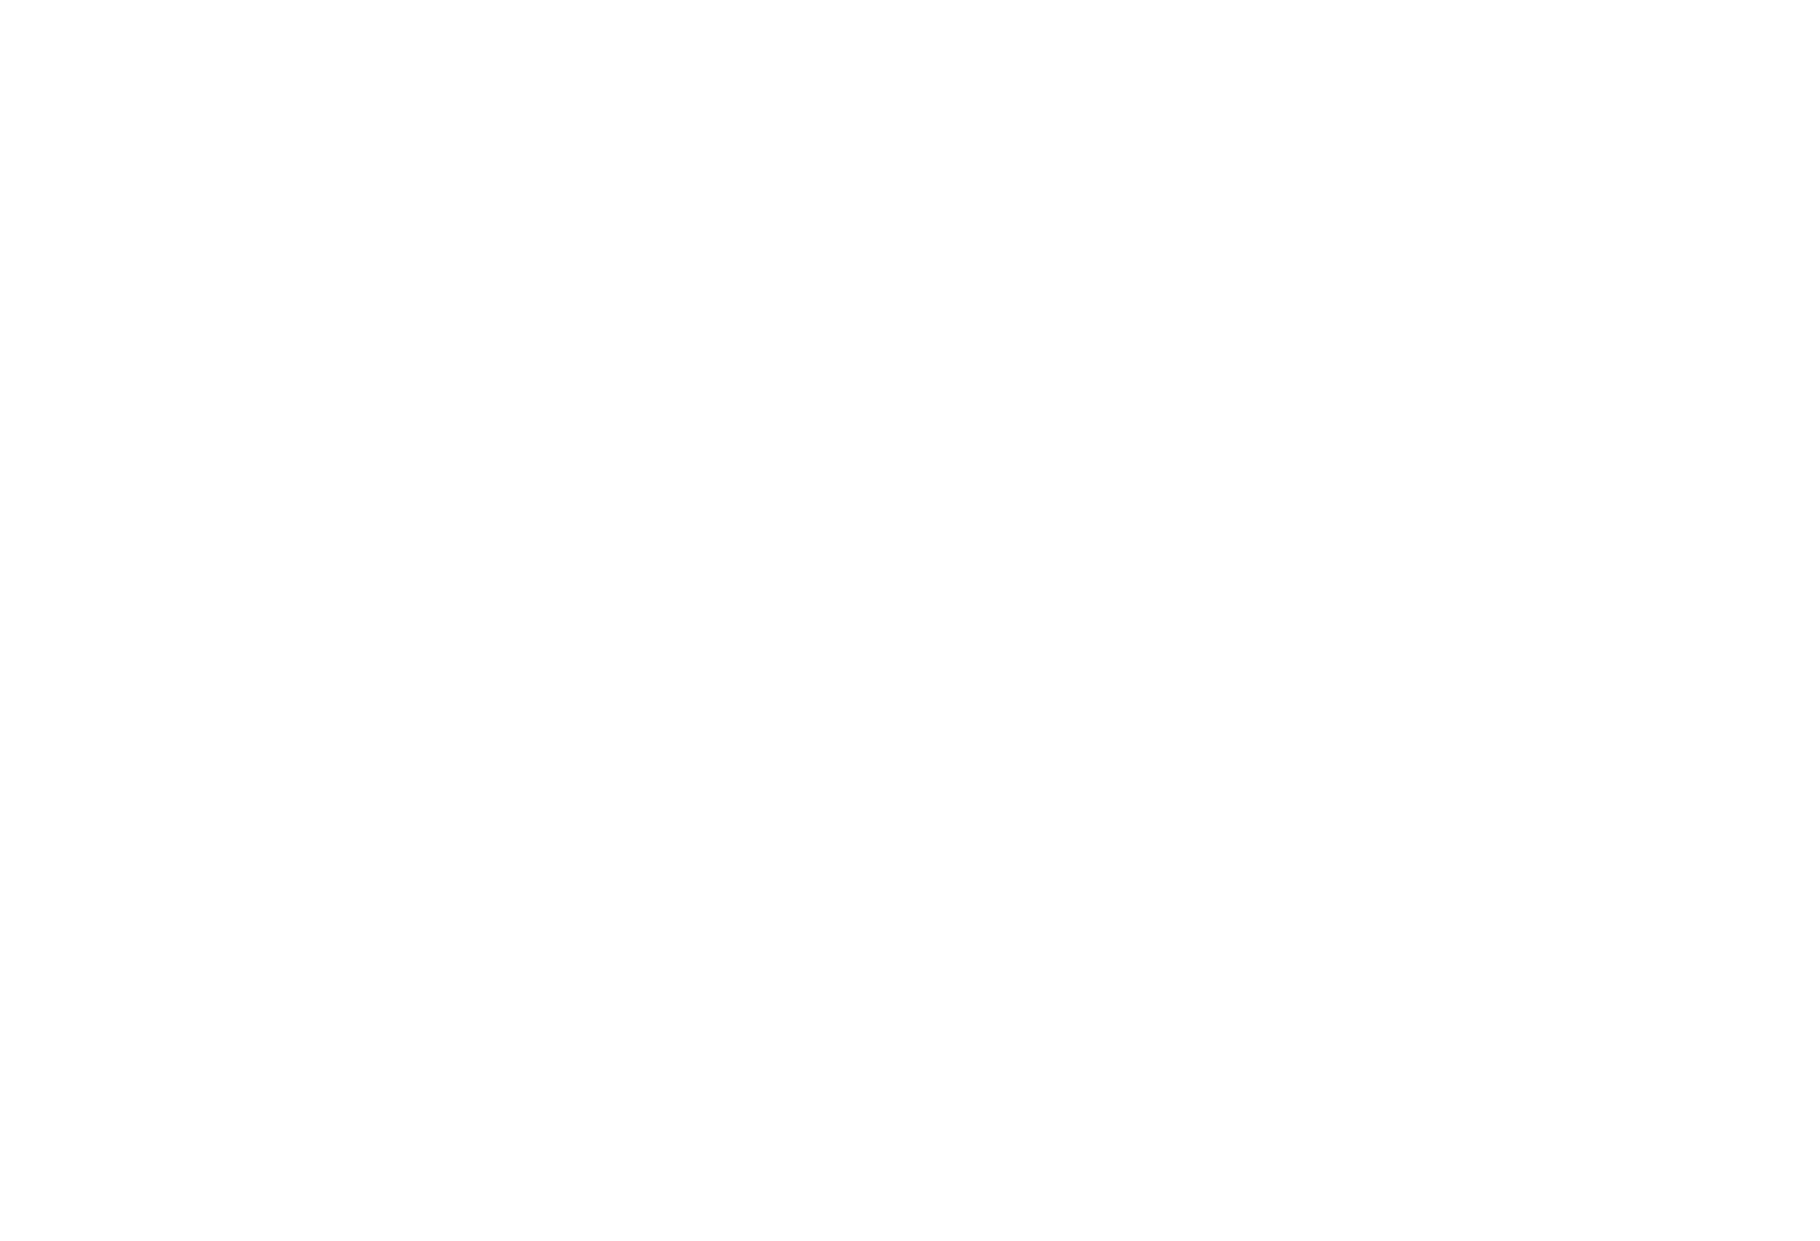 New Roots - Fase 2